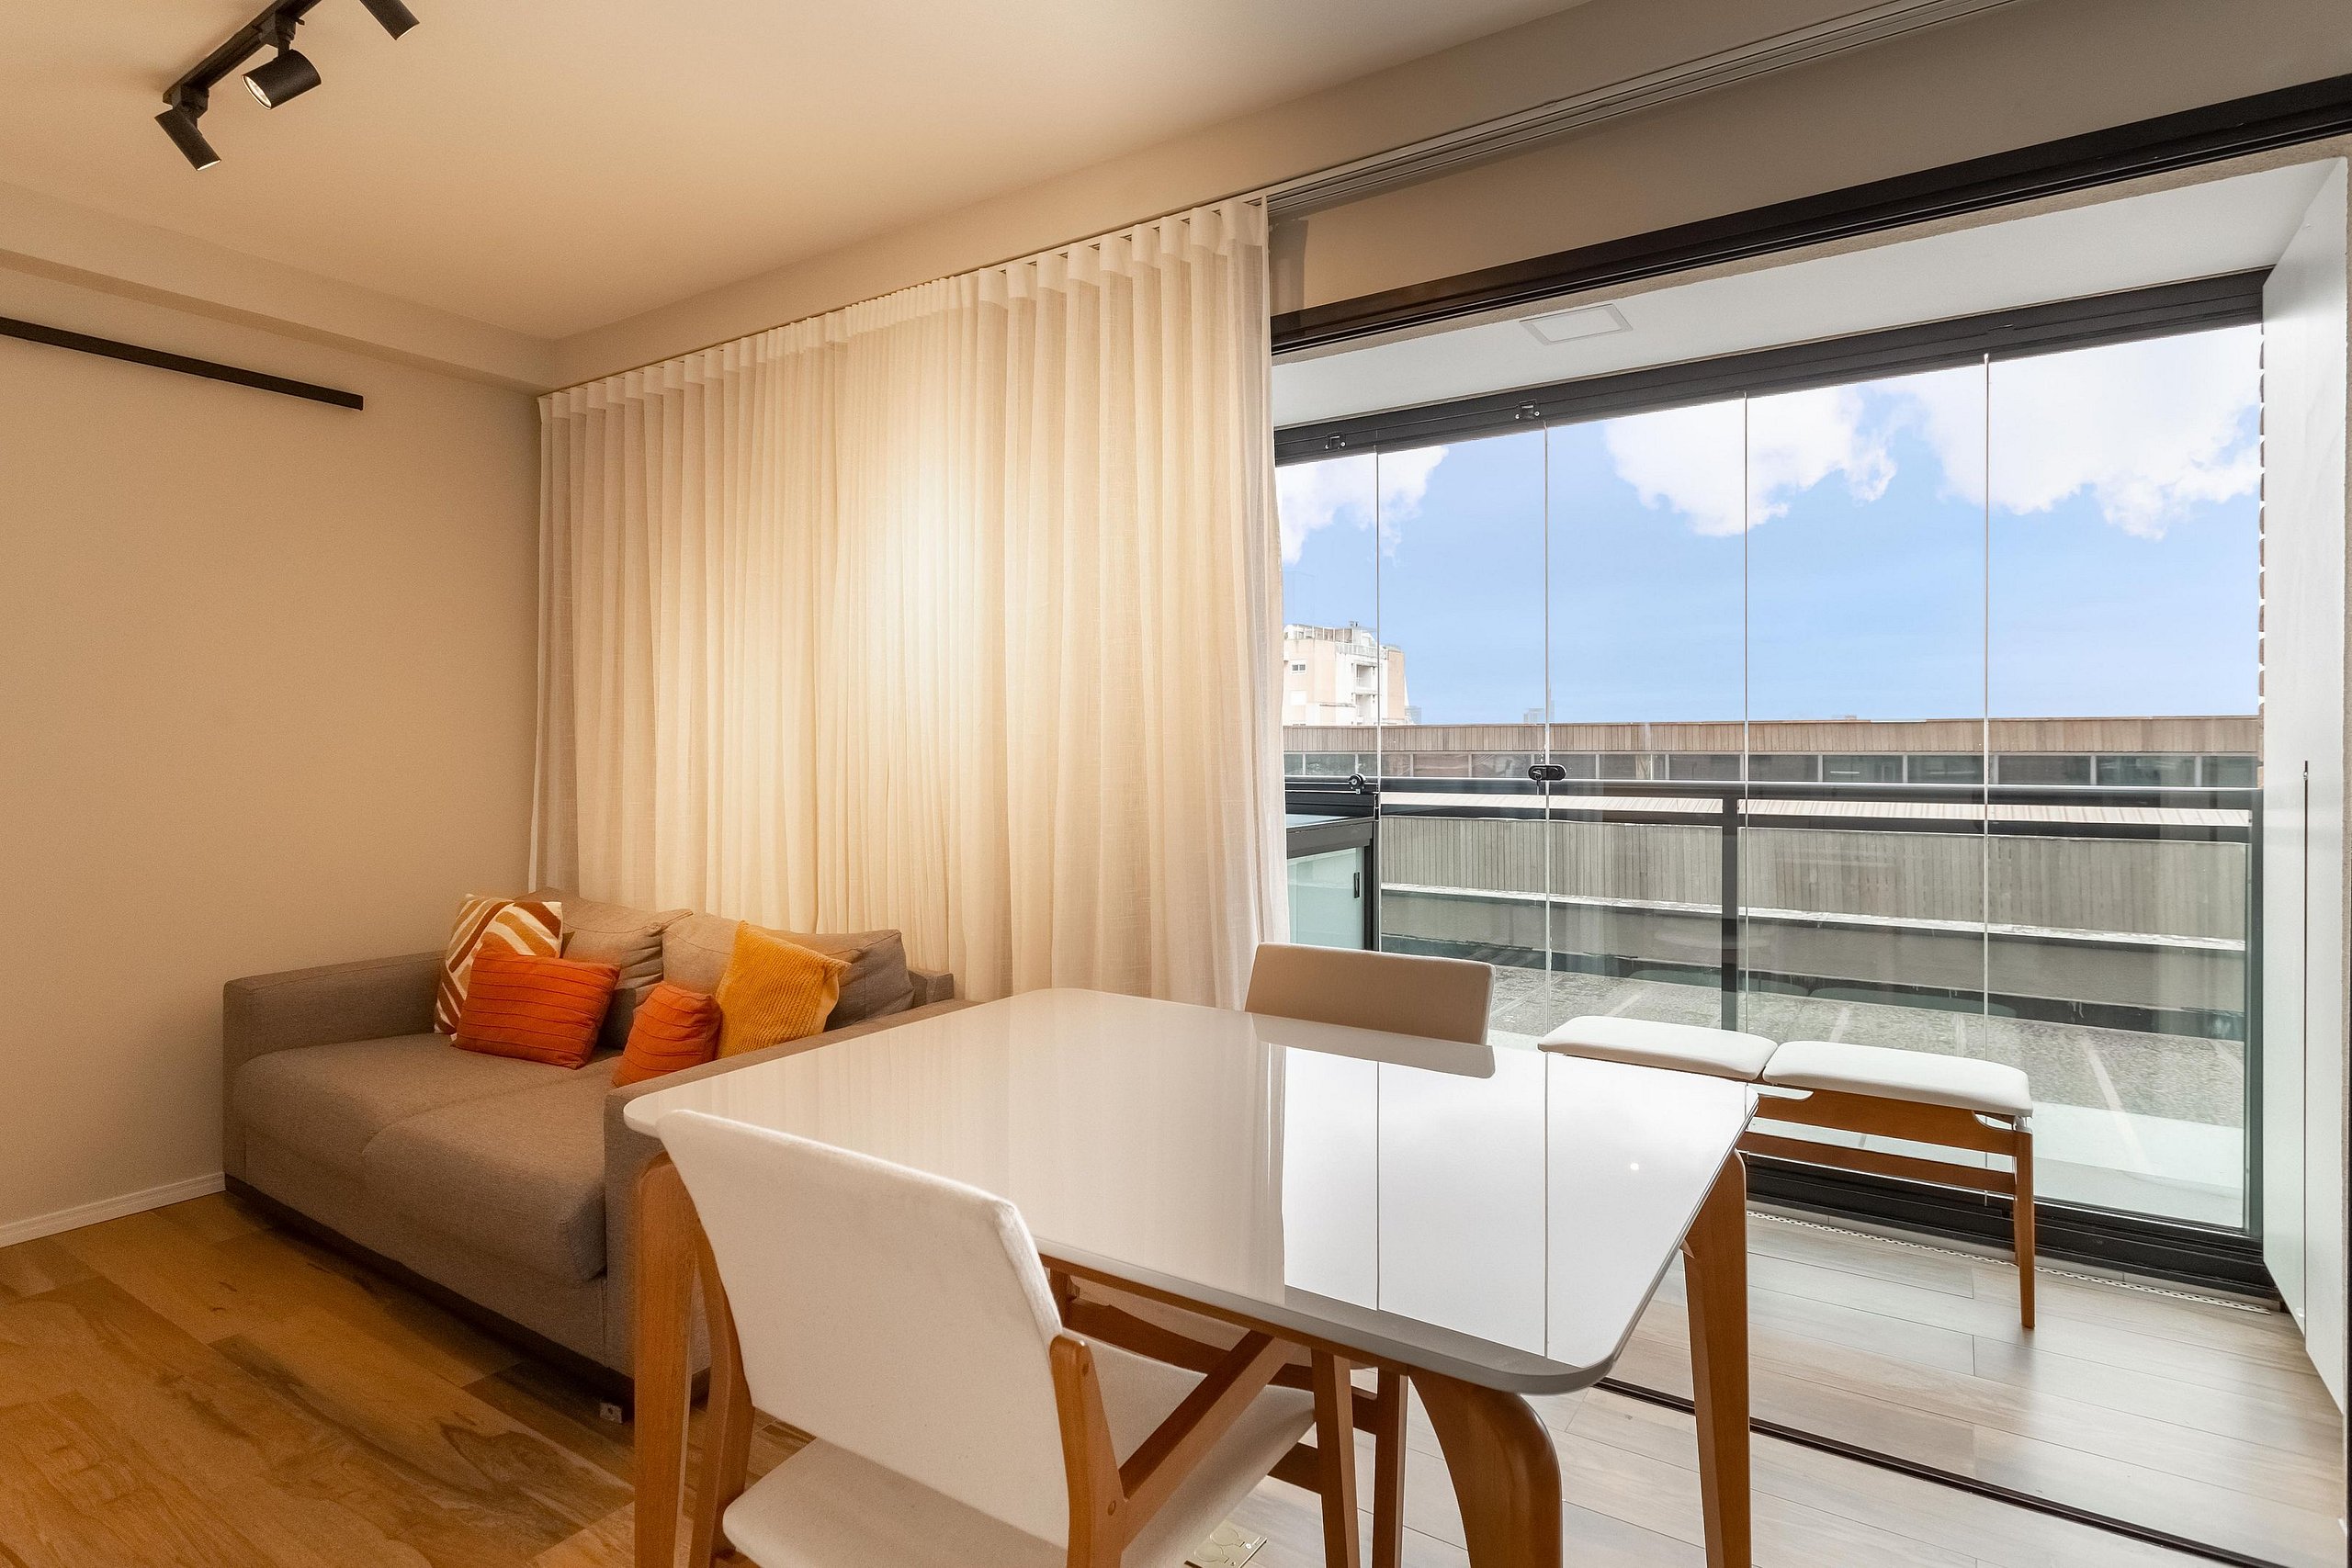 Property Image 1 - Newly apartment, quiet and with leisure infrastructure in Vila Madalena, Sao Paulo.